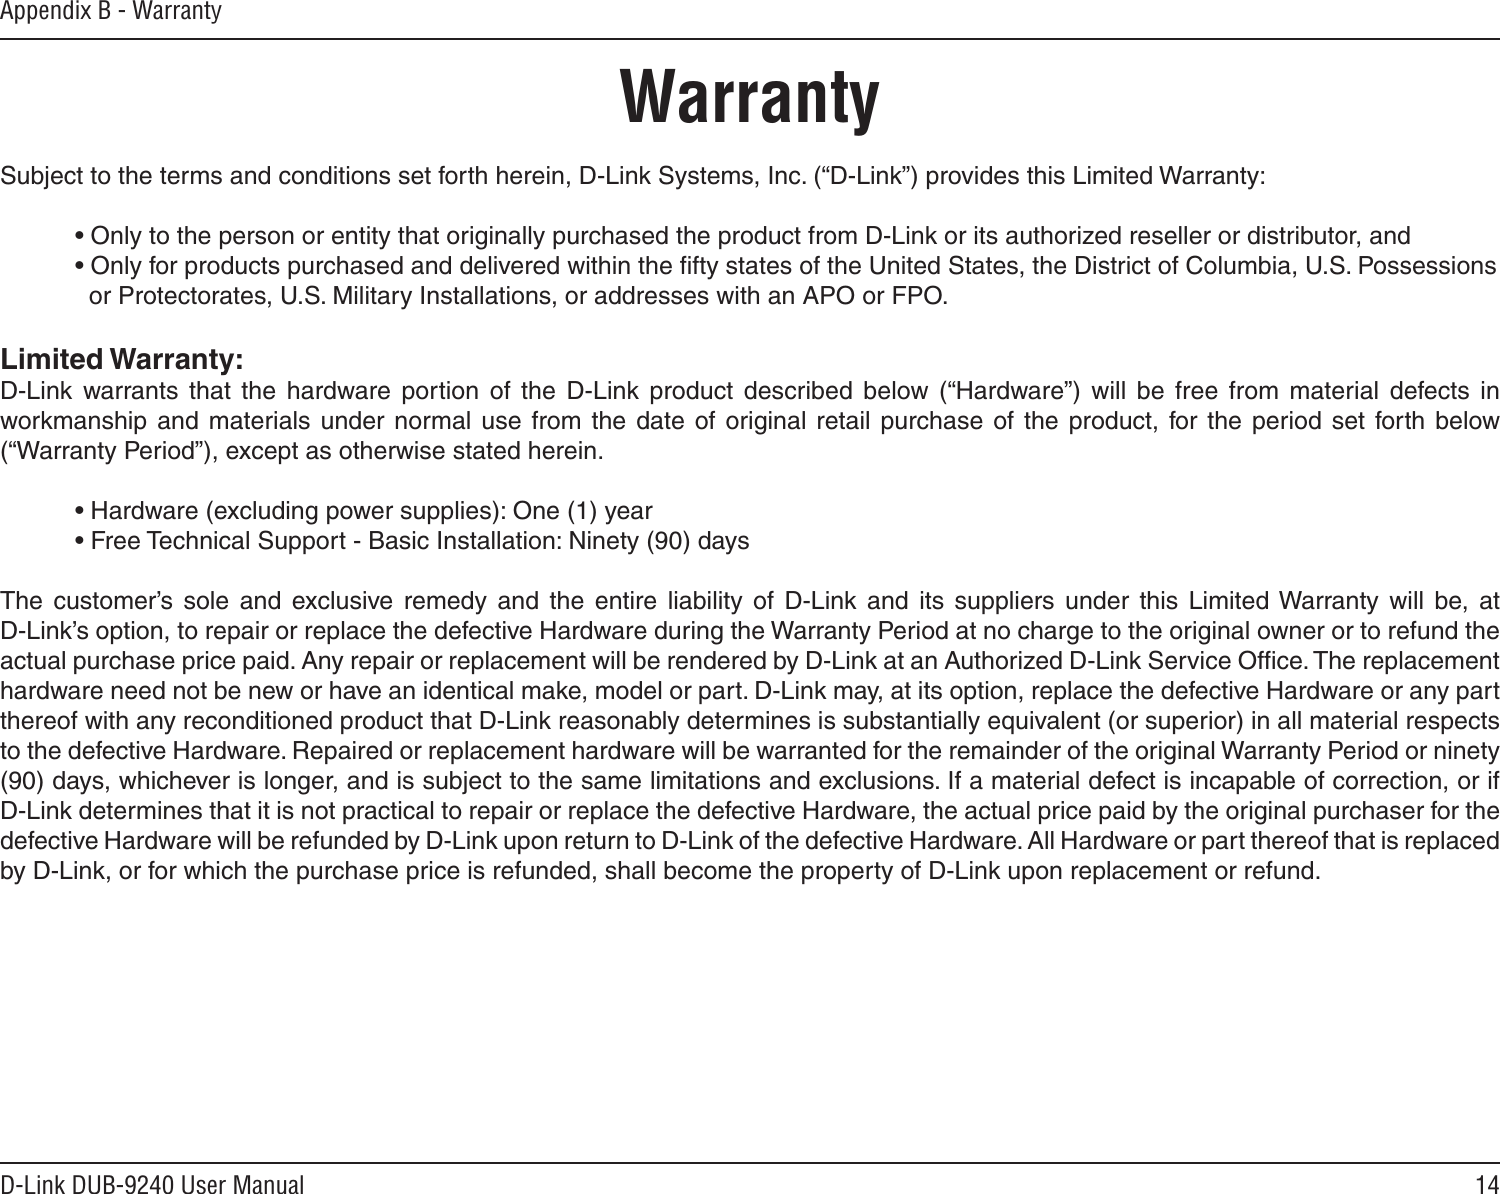 14D-Link DUB-9240 User ManualAppendix B - WarrantyWarrantySubject to the terms and conditions set forth herein, D-Link Systems, Inc. (“D-Link”) provides this Limited Warranty:  • Only to the person or entity that originally purchased the product from D-Link or its authorized reseller or distributor, and  • Only for products purchased and delivered within the ﬁfty states of the United States, the District of Columbia, U.S. Possessions      or Protectorates, U.S. Military Installations, or addresses with an APO or FPO.Limited Warranty:D-Link  warrants that  the  hardware  portion  of  the  D-Link  product  described  below  (“Hardware”)  will  be  free  from  material  defects  in workmanship  and materials  under normal  use from  the date  of  original  retail purchase  of  the  product,  for  the period  set forth  below (“Warranty Period”), except as otherwise stated herein.  • Hardware (excluding power supplies): One (1) year  • Free Technical Support - Basic Installation: Ninety (90) daysThe  customer’s  sole  and  exclusive  remedy  and  the  entire  liability  of  D-Link  and  its  suppliers  under  this  Limited Warranty  will  be,  at  D-Link’s option, to repair or replace the defective Hardware during the Warranty Period at no charge to the original owner or to refund the actual purchase price paid. Any repair or replacement will be rendered by D-Link at an Authorized D-Link Service Ofﬁce. The replacement hardware need not be new or have an identical make, model or part. D-Link may, at its option, replace the defective Hardware or any part thereof with any reconditioned product that D-Link reasonably determines is substantially equivalent (or superior) in all material respects to the defective Hardware. Repaired or replacement hardware will be warranted for the remainder of the original Warranty Period or ninety (90) days, whichever is longer, and is subject to the same limitations and exclusions. If a material defect is incapable of correction, or if D-Link determines that it is not practical to repair or replace the defective Hardware, the actual price paid by the original purchaser for the defective Hardware will be refunded by D-Link upon return to D-Link of the defective Hardware. All Hardware or part thereof that is replaced by D-Link, or for which the purchase price is refunded, shall become the property of D-Link upon replacement or refund.